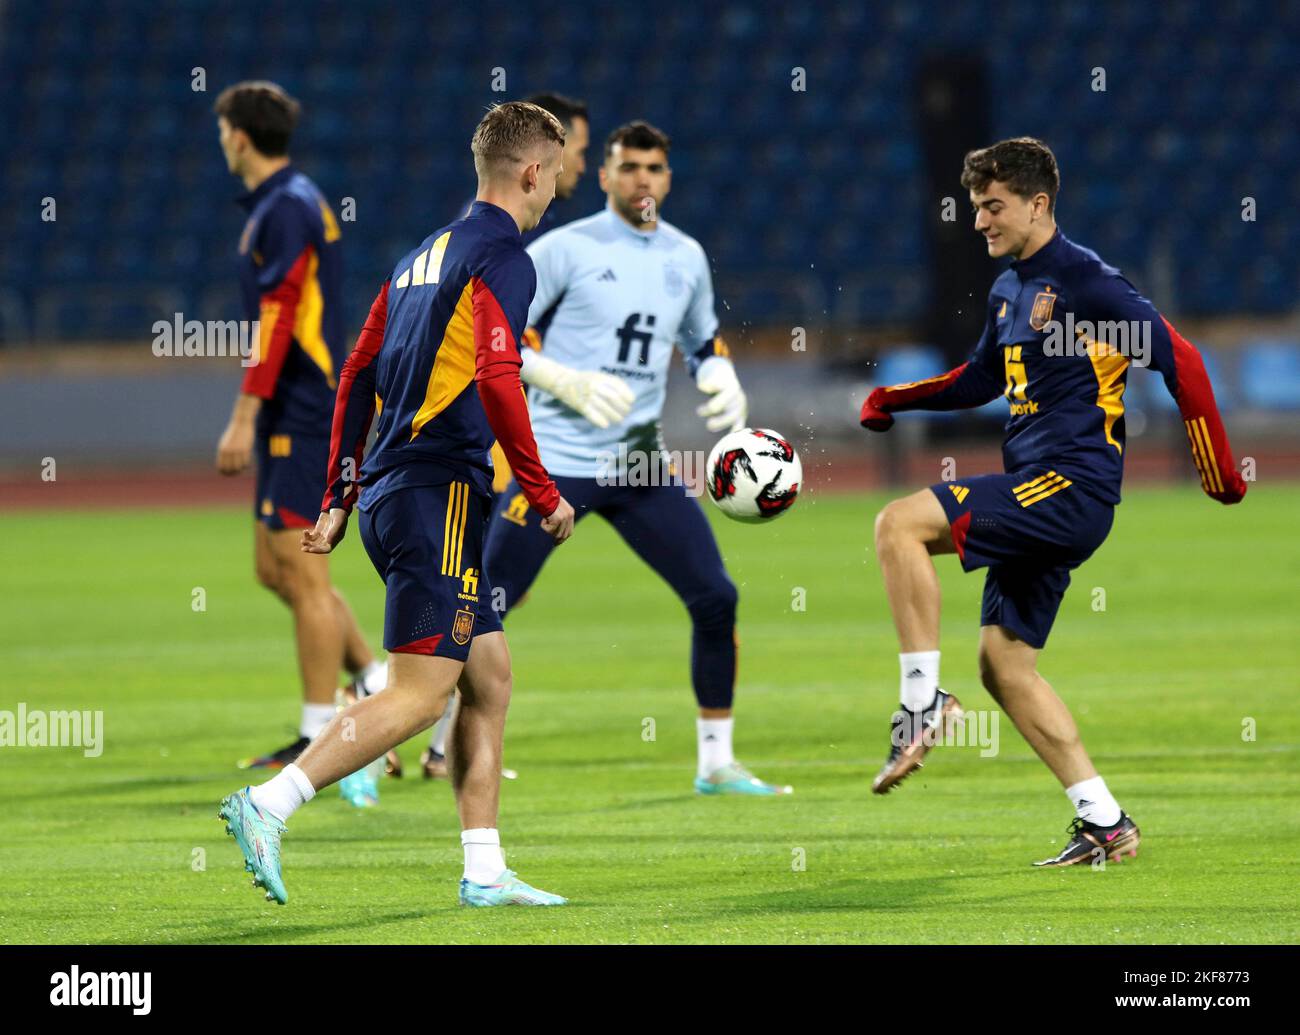 Amman, Jordan. 16th Nov, 2022. Spanish national football team players warm up during their training session in Amman, Jordan, Nov. 16, 2022. Spain will face Jordan in their international friendly match in Amman on Thursday, the squad's last match before they head to Qatar for the World Cup. Credit: Mohammad Abu Ghosh/Xinhua/Alamy Live News Stock Photo